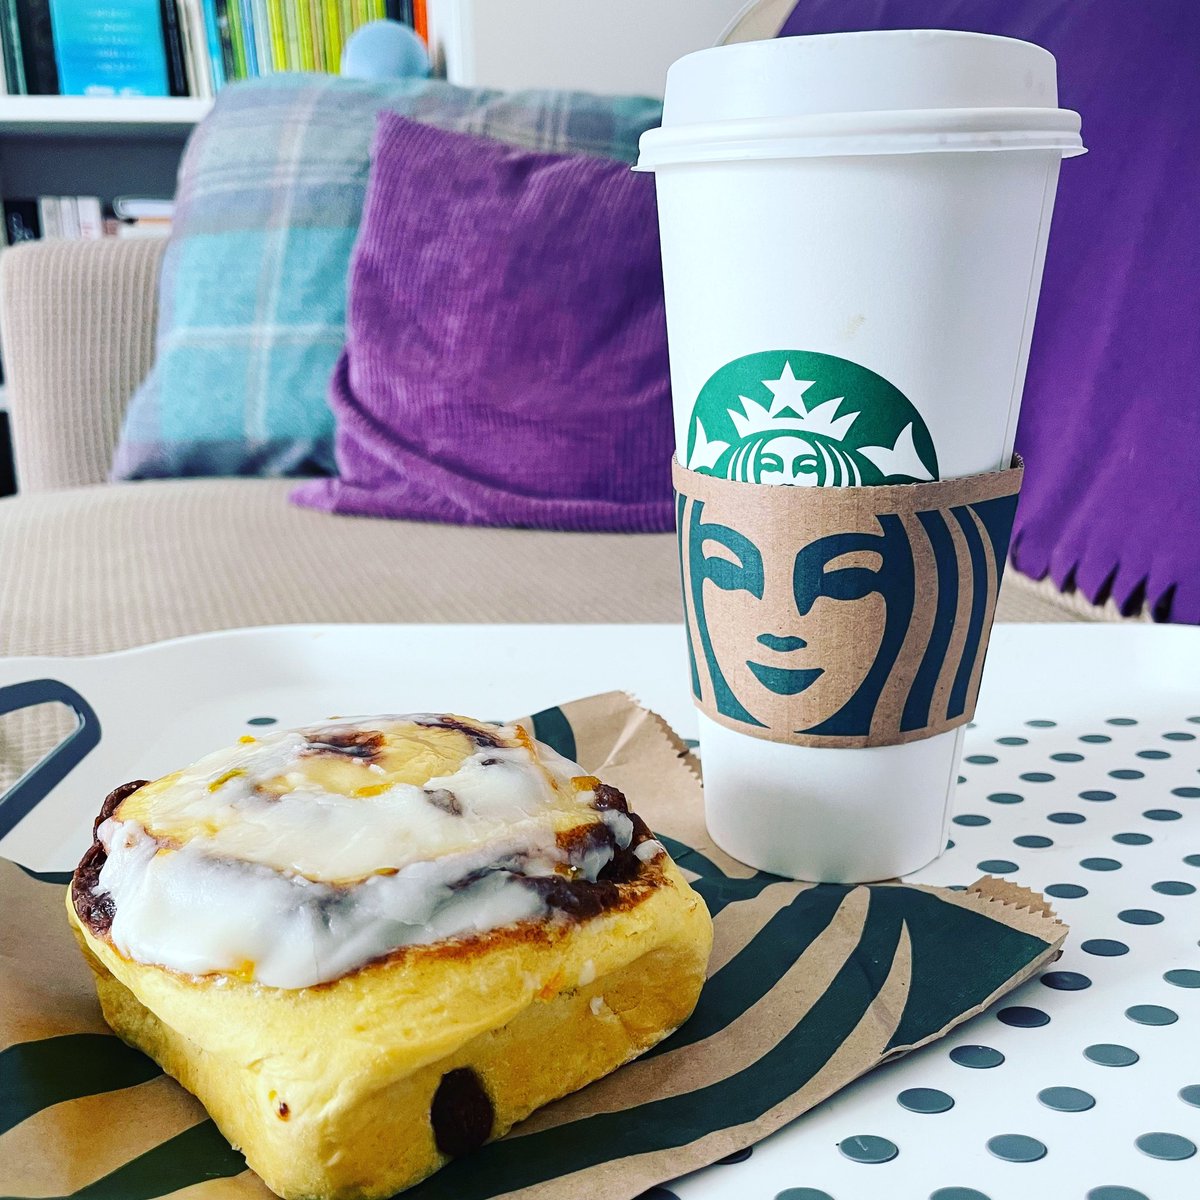 Treat time Friday! Here’s to a relaxing weekend for everyone 💜

#Starbucks #CinnamonSwirl #Friday